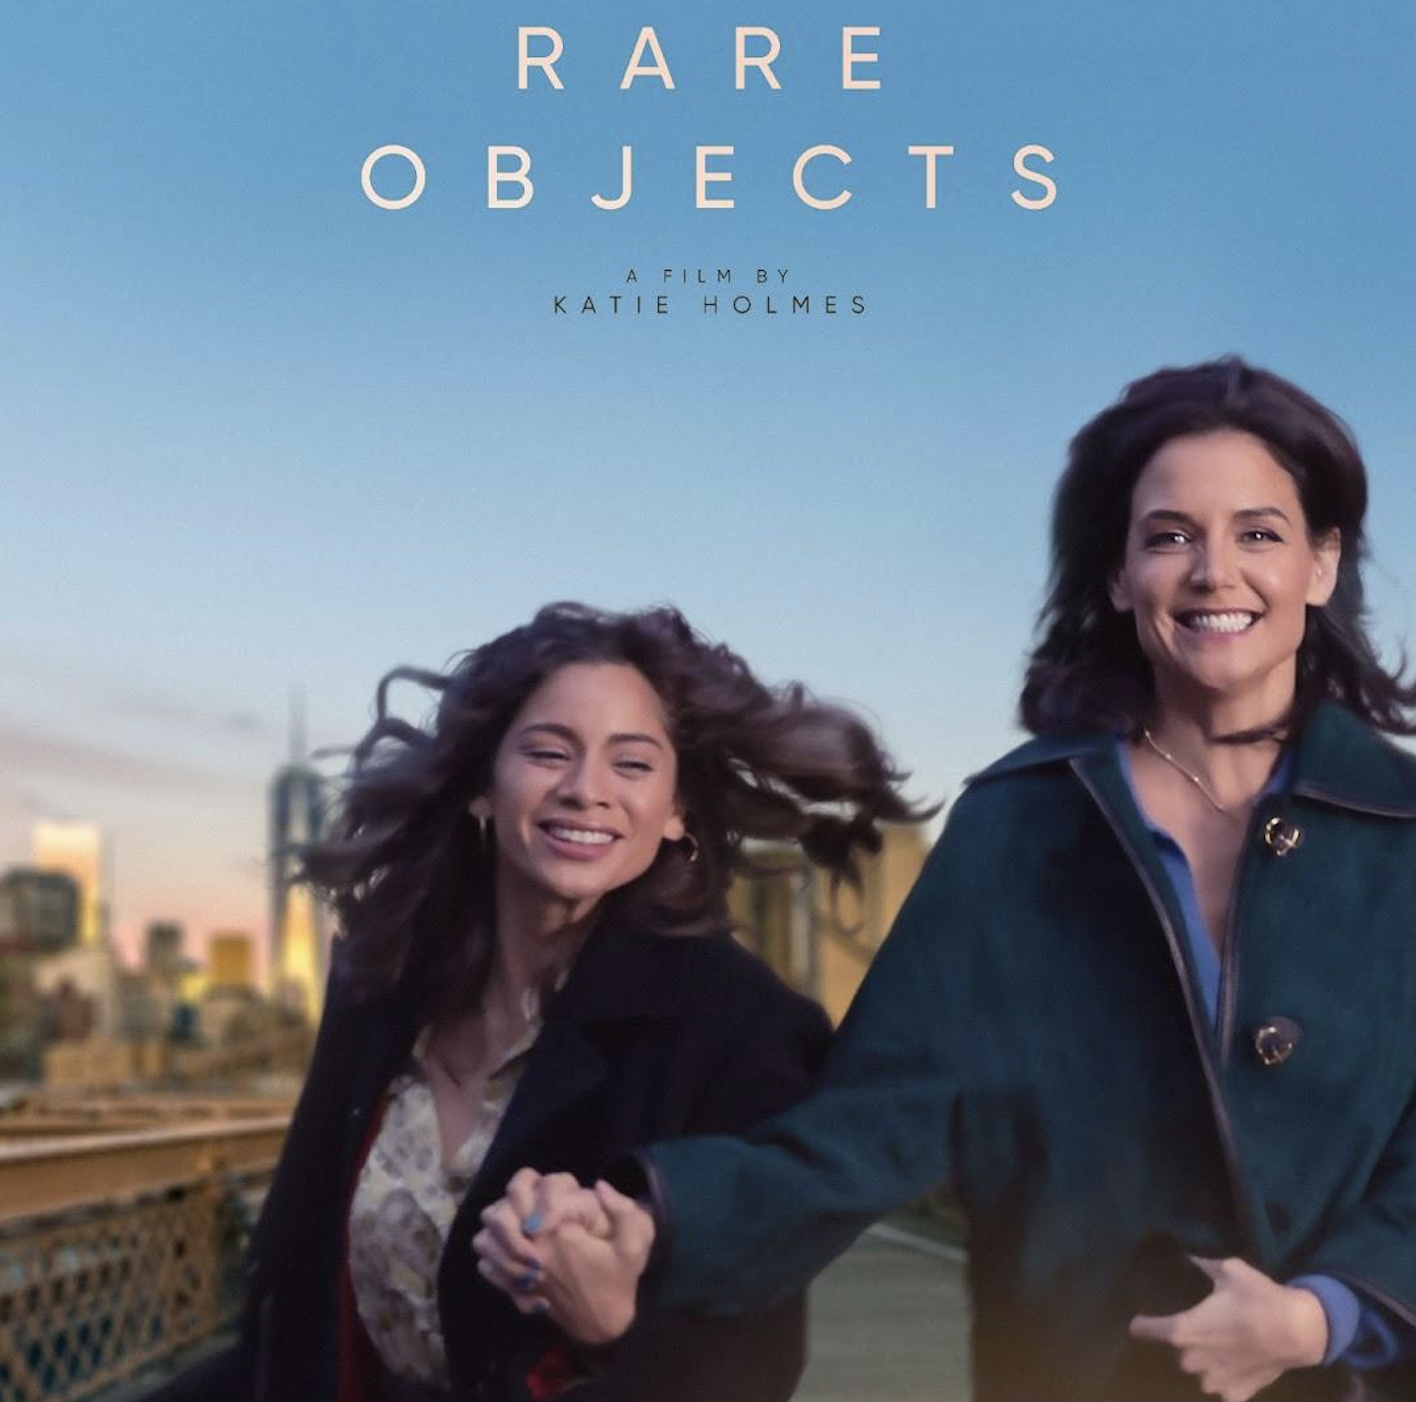 Katie Holmes And Julia Mayorga Discuss Friendship And Discovery In Rare Objects | Exclusive 